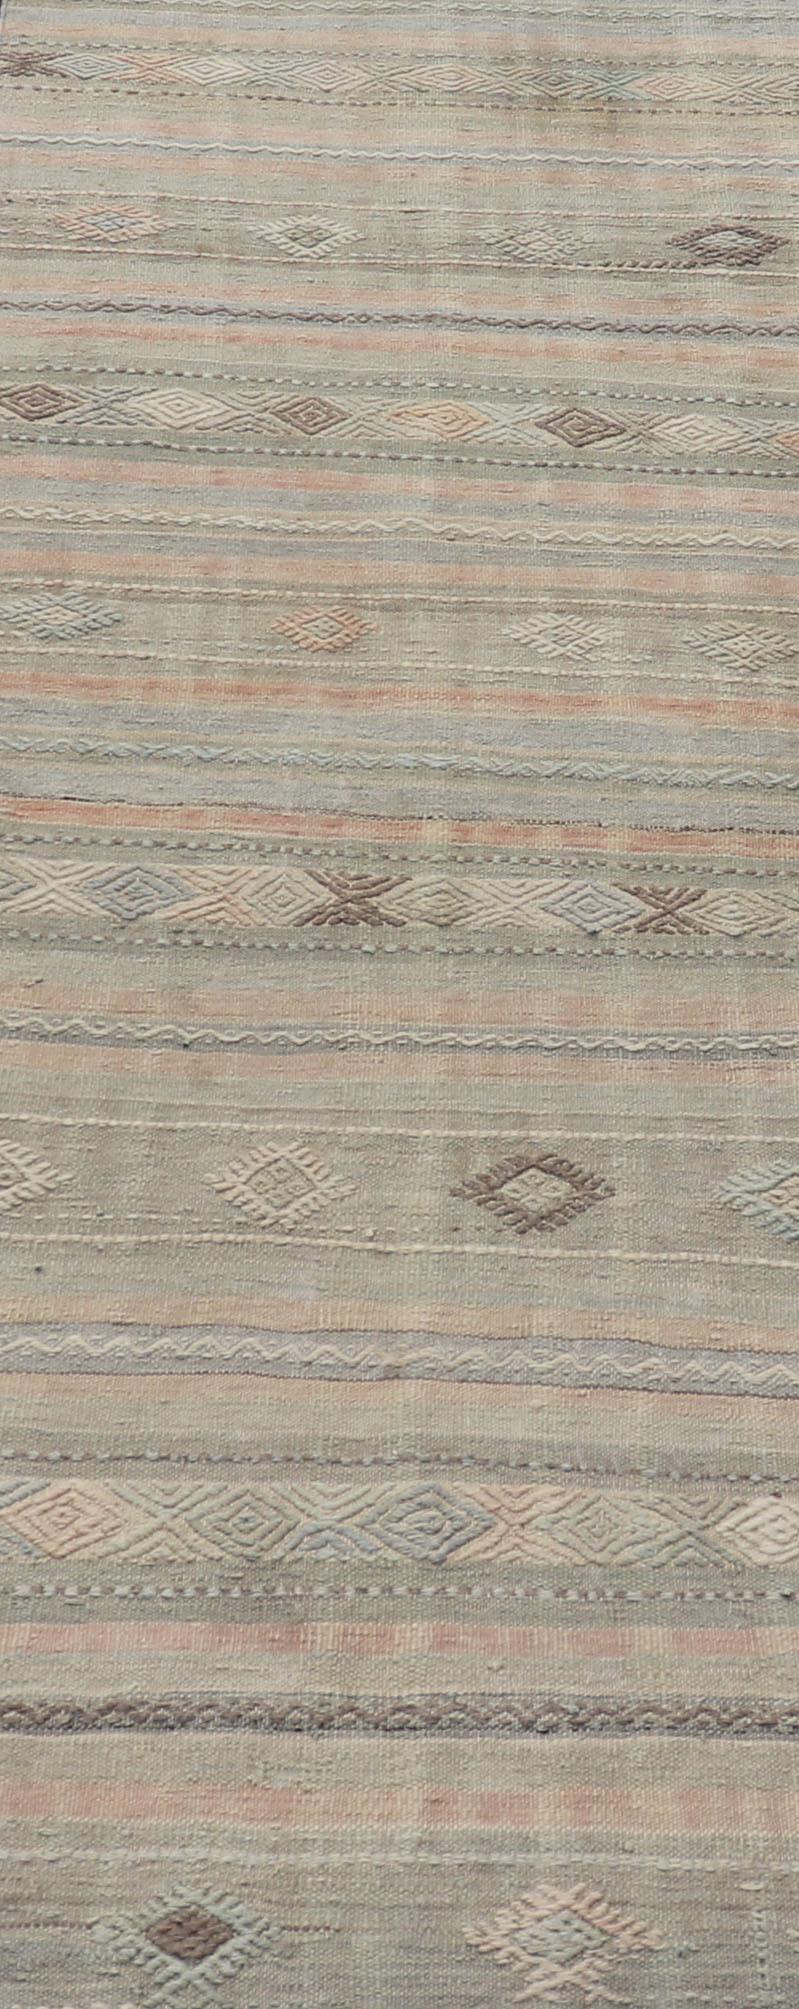 Geometric Embroidered Vintage Turkish Flat-Weave Runner in Warm Tones For Sale 1